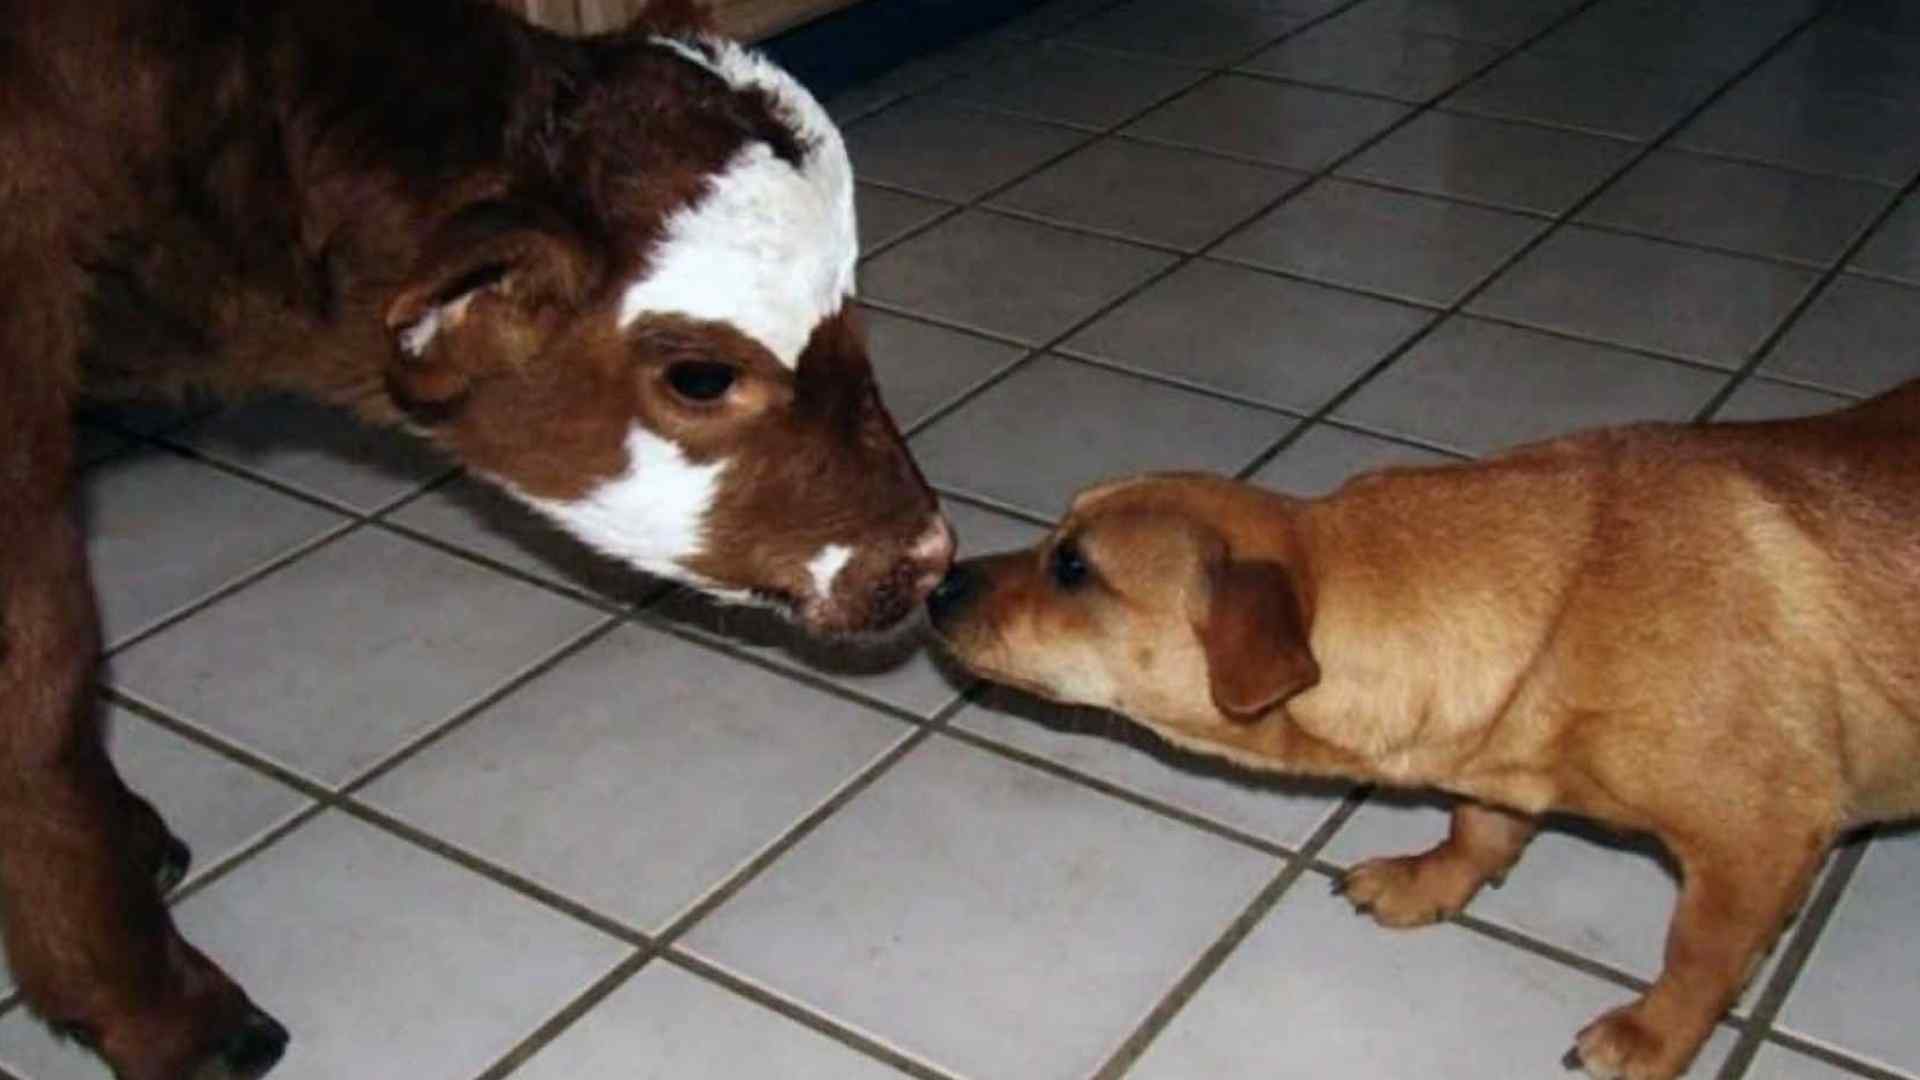 An amazing friendship between a miniature cow and her dog pack